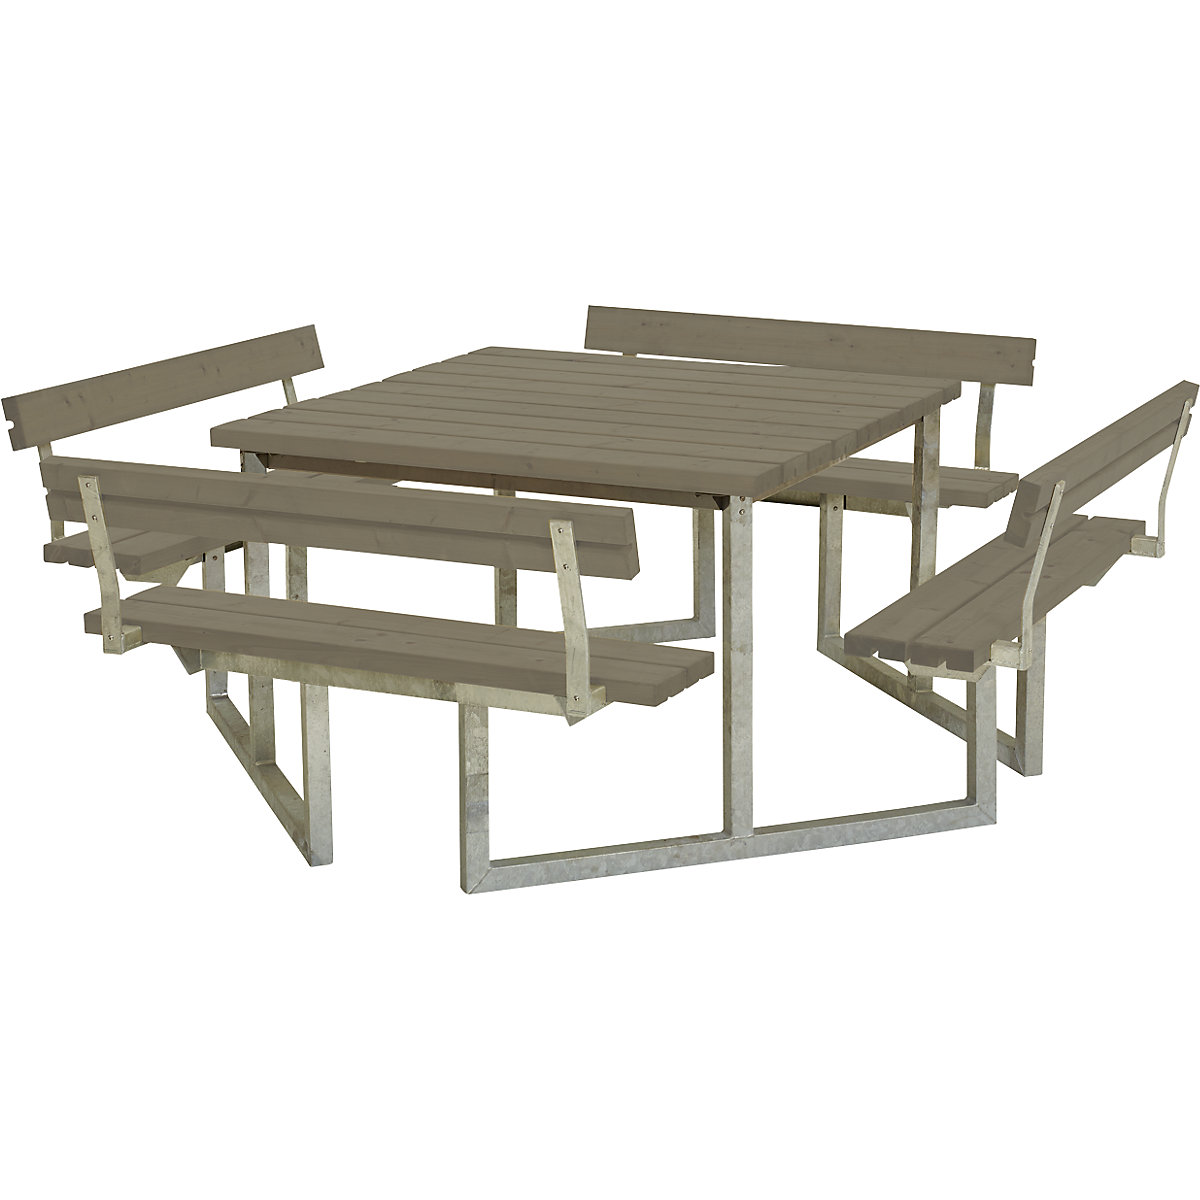 Picnic bench for 8 people, certified pine wood, grey-brown, with back rest-10